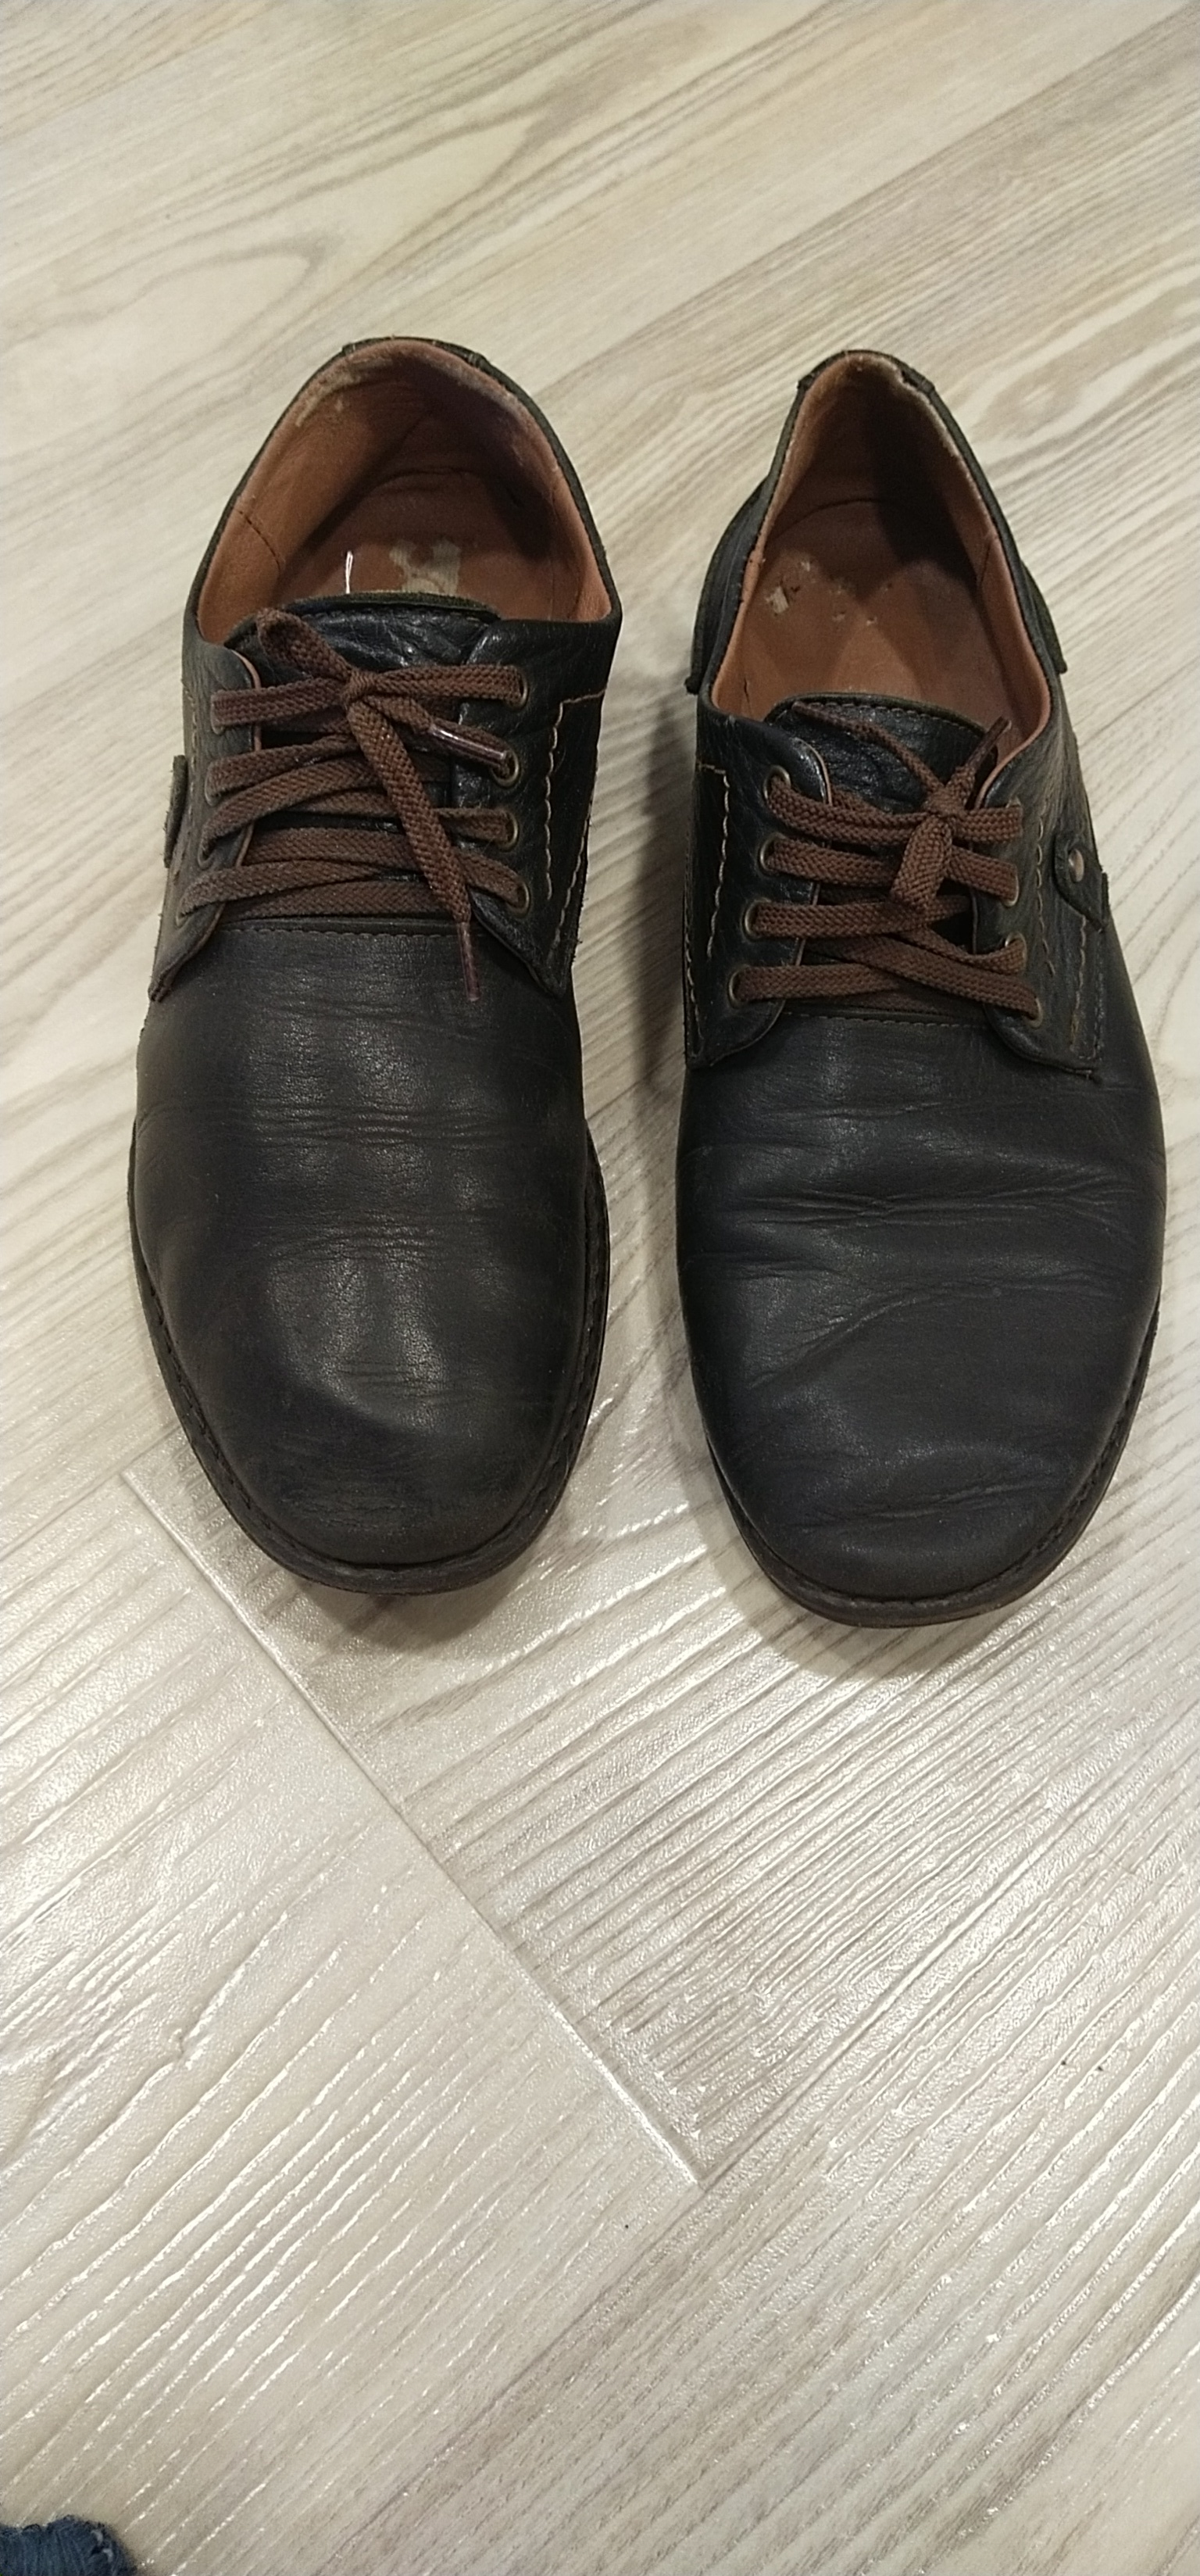 My wife wanted to throw away my shoes. - My, Second Life, Leather shoes, Saving, Longpost, 